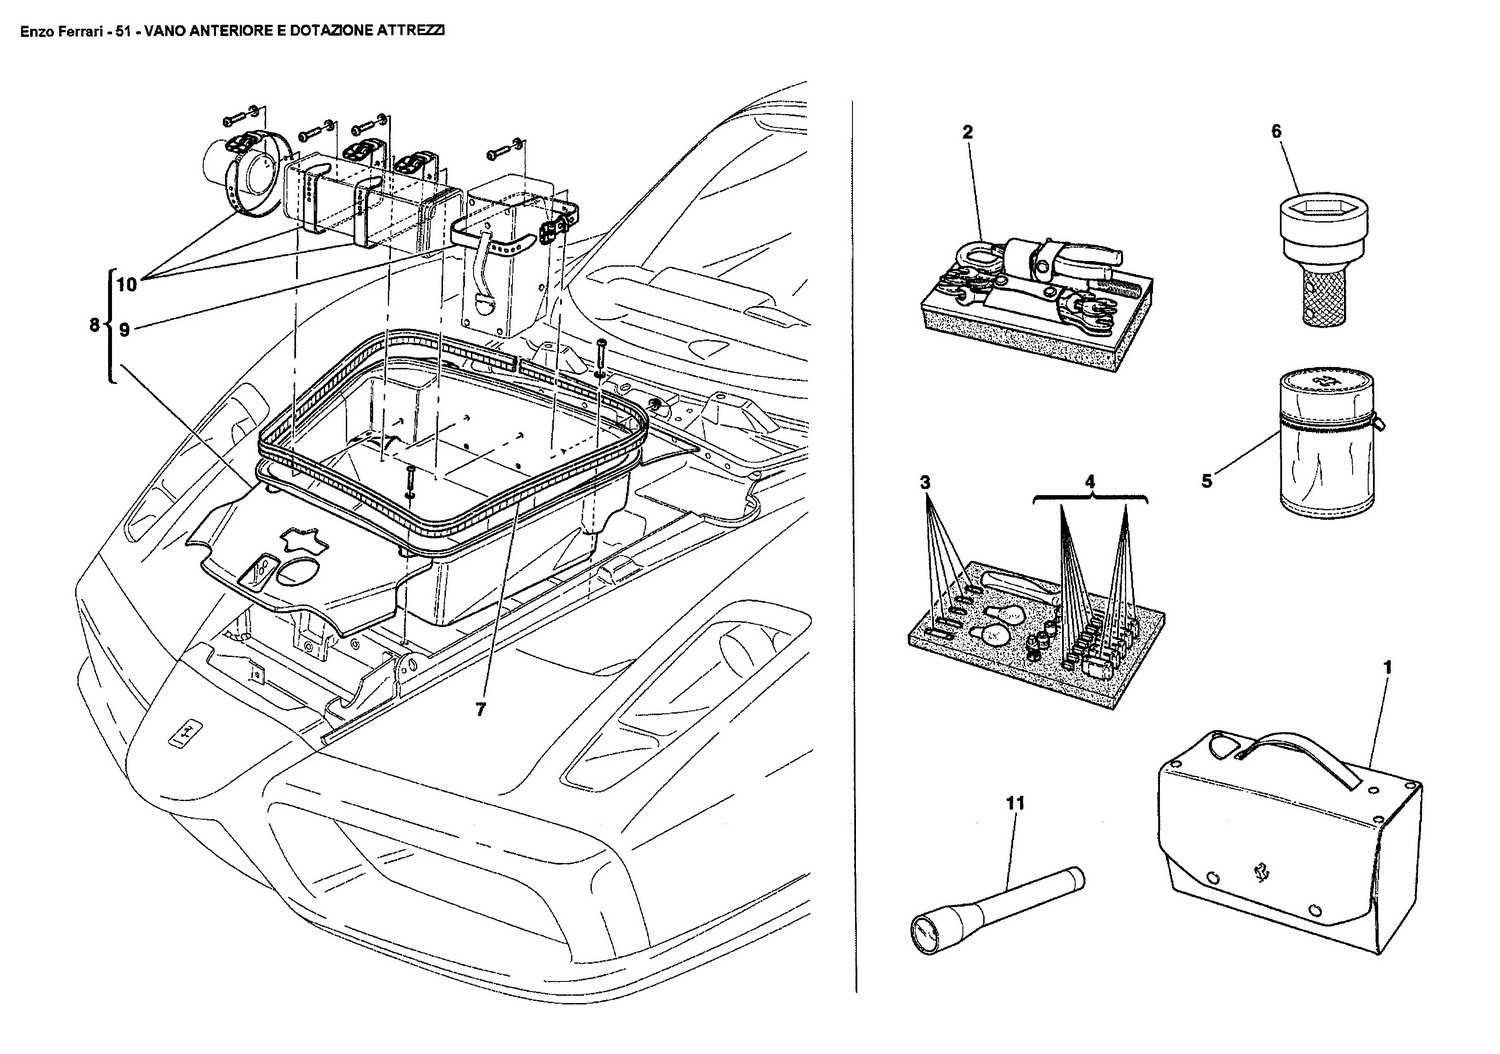 TRUNK COMPARTMENT AND TOOLS EQUIPMENT